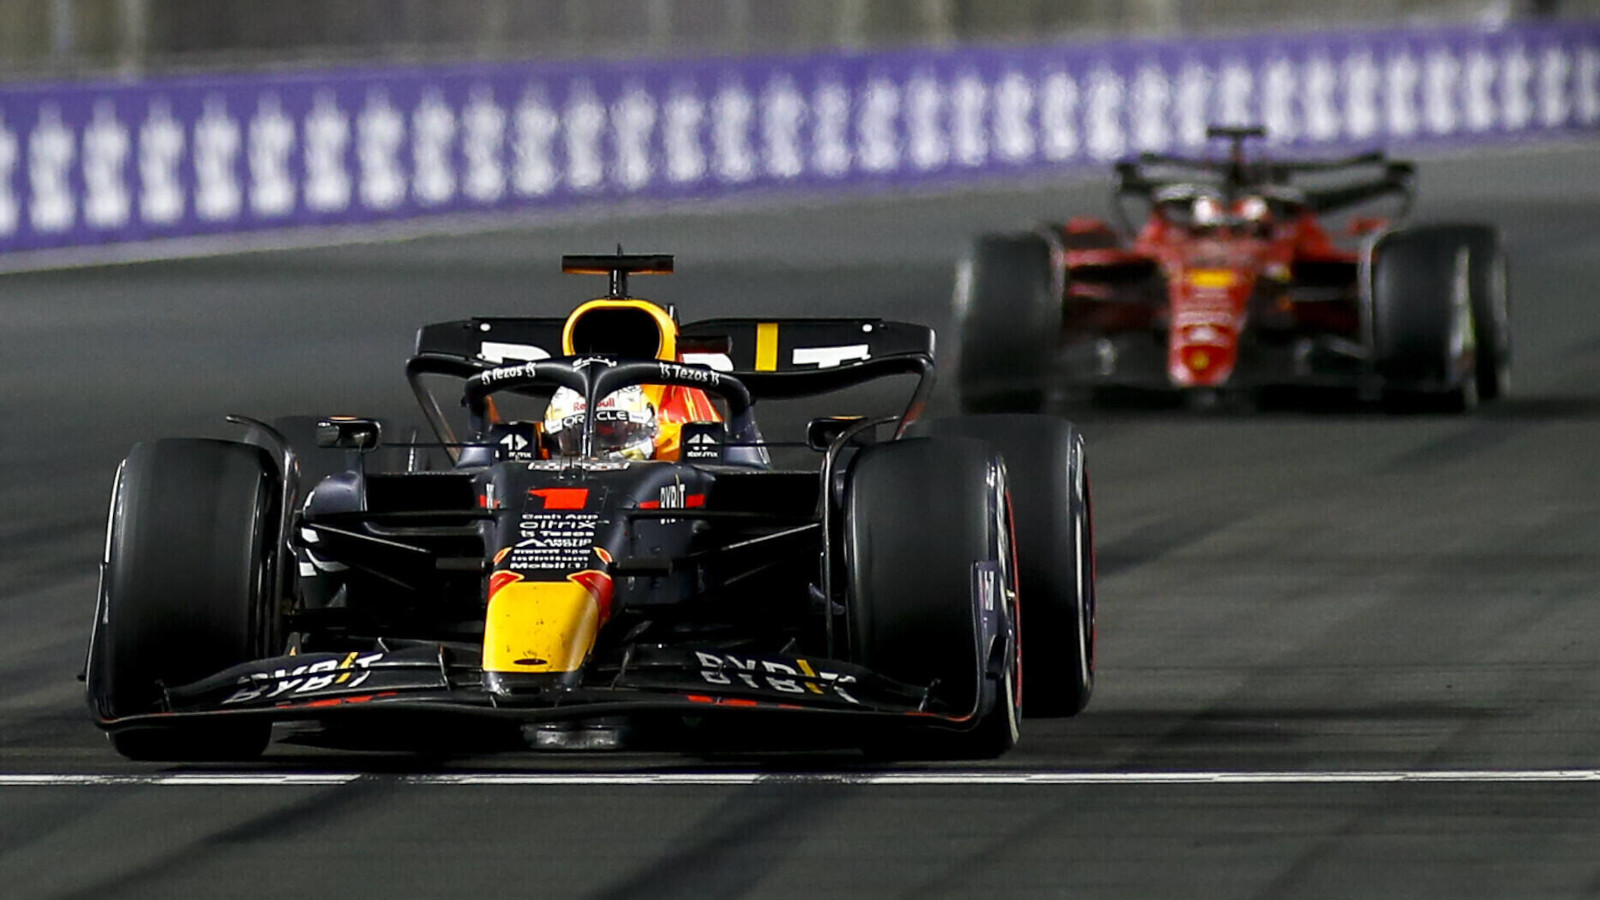 Max Verstappen chased by Charles Leclerc. FIA F1 Saudi Arabia March 2022